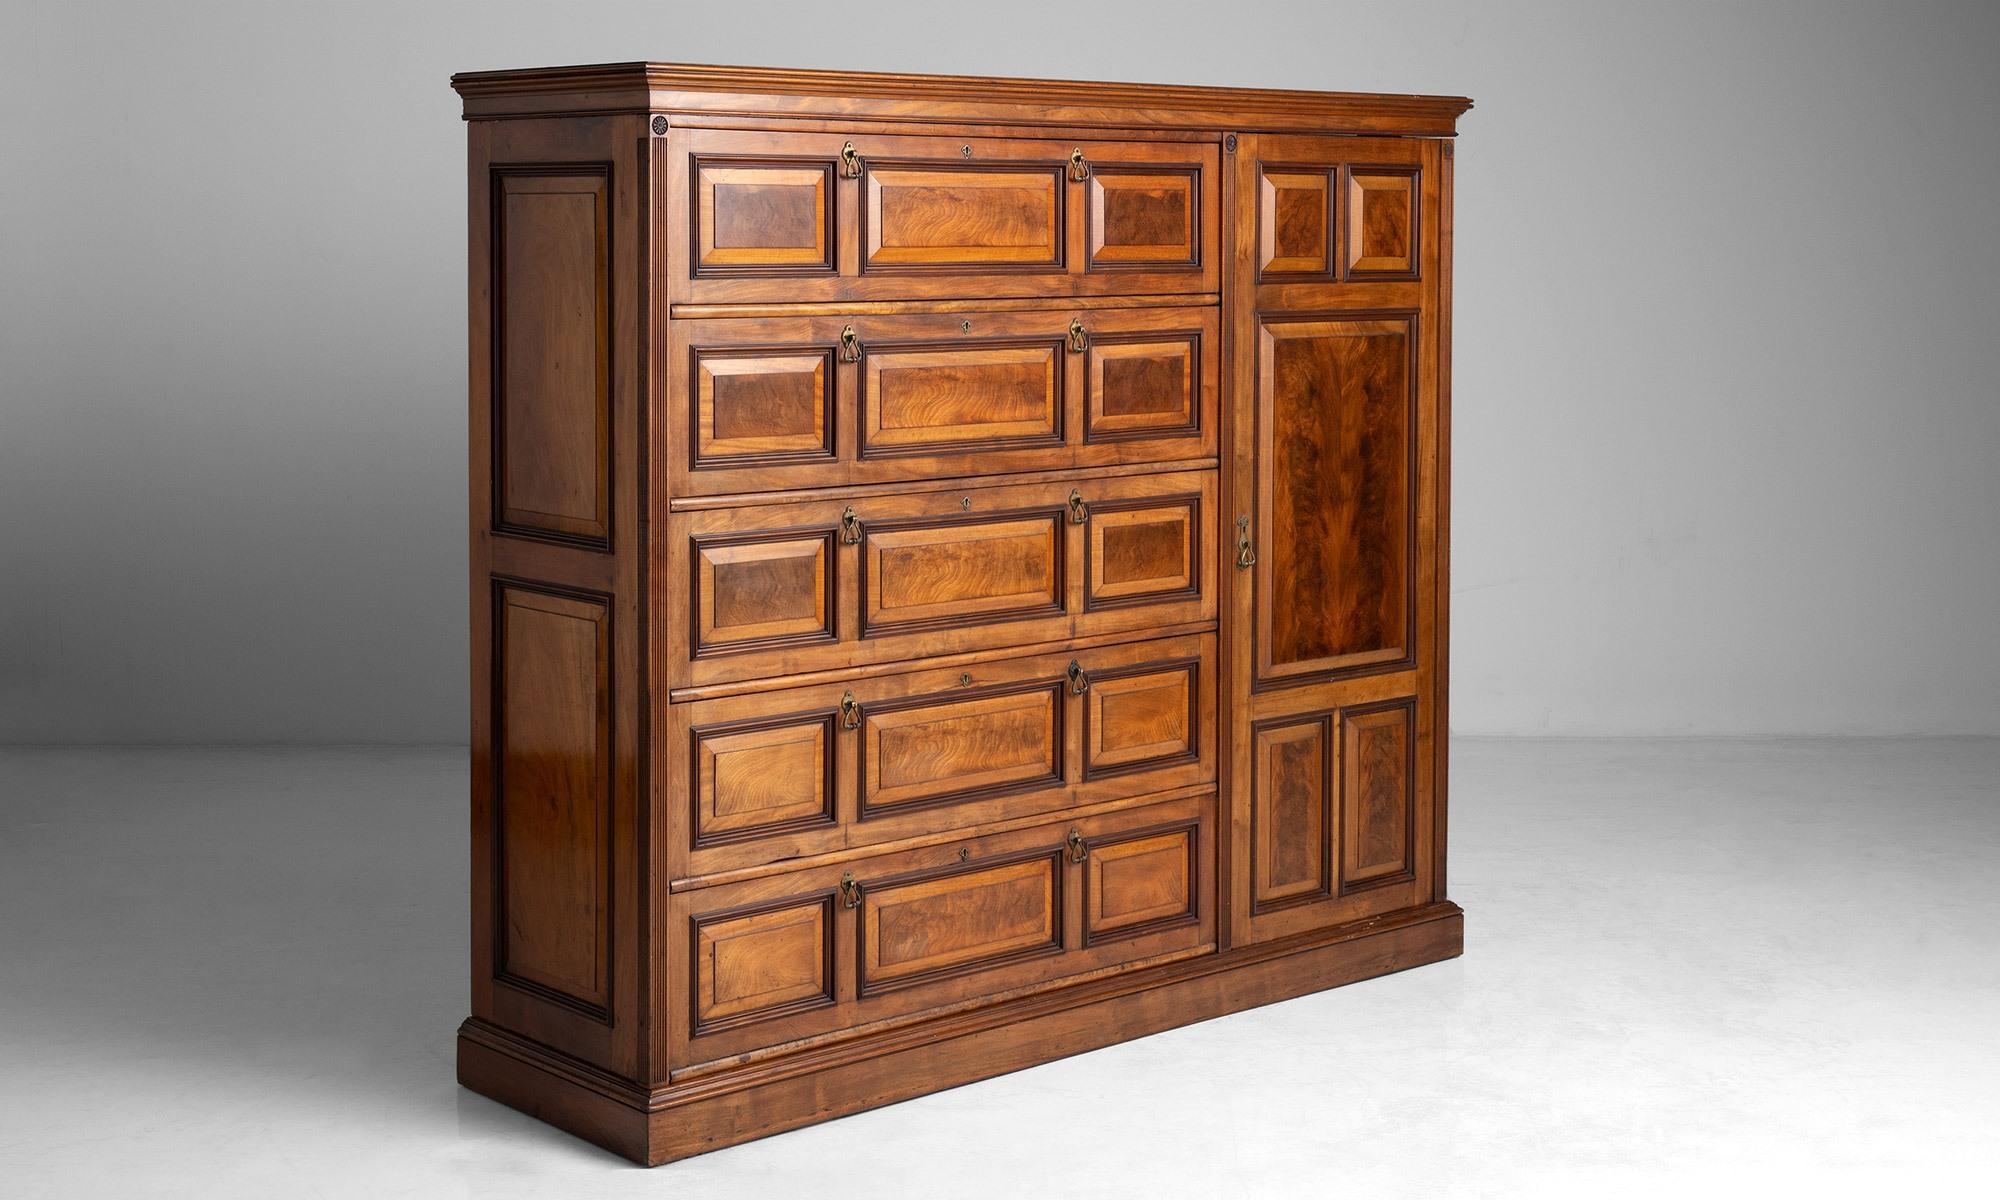 Mahogany wardrobe

England, circa 1890

Finely made cabinet, constructed in solid mahogany with flame mahogany 

panels, reeded moldings and brass handles. The piece also features imported

American locks by Alfred Charles Hobbs.

78”W X